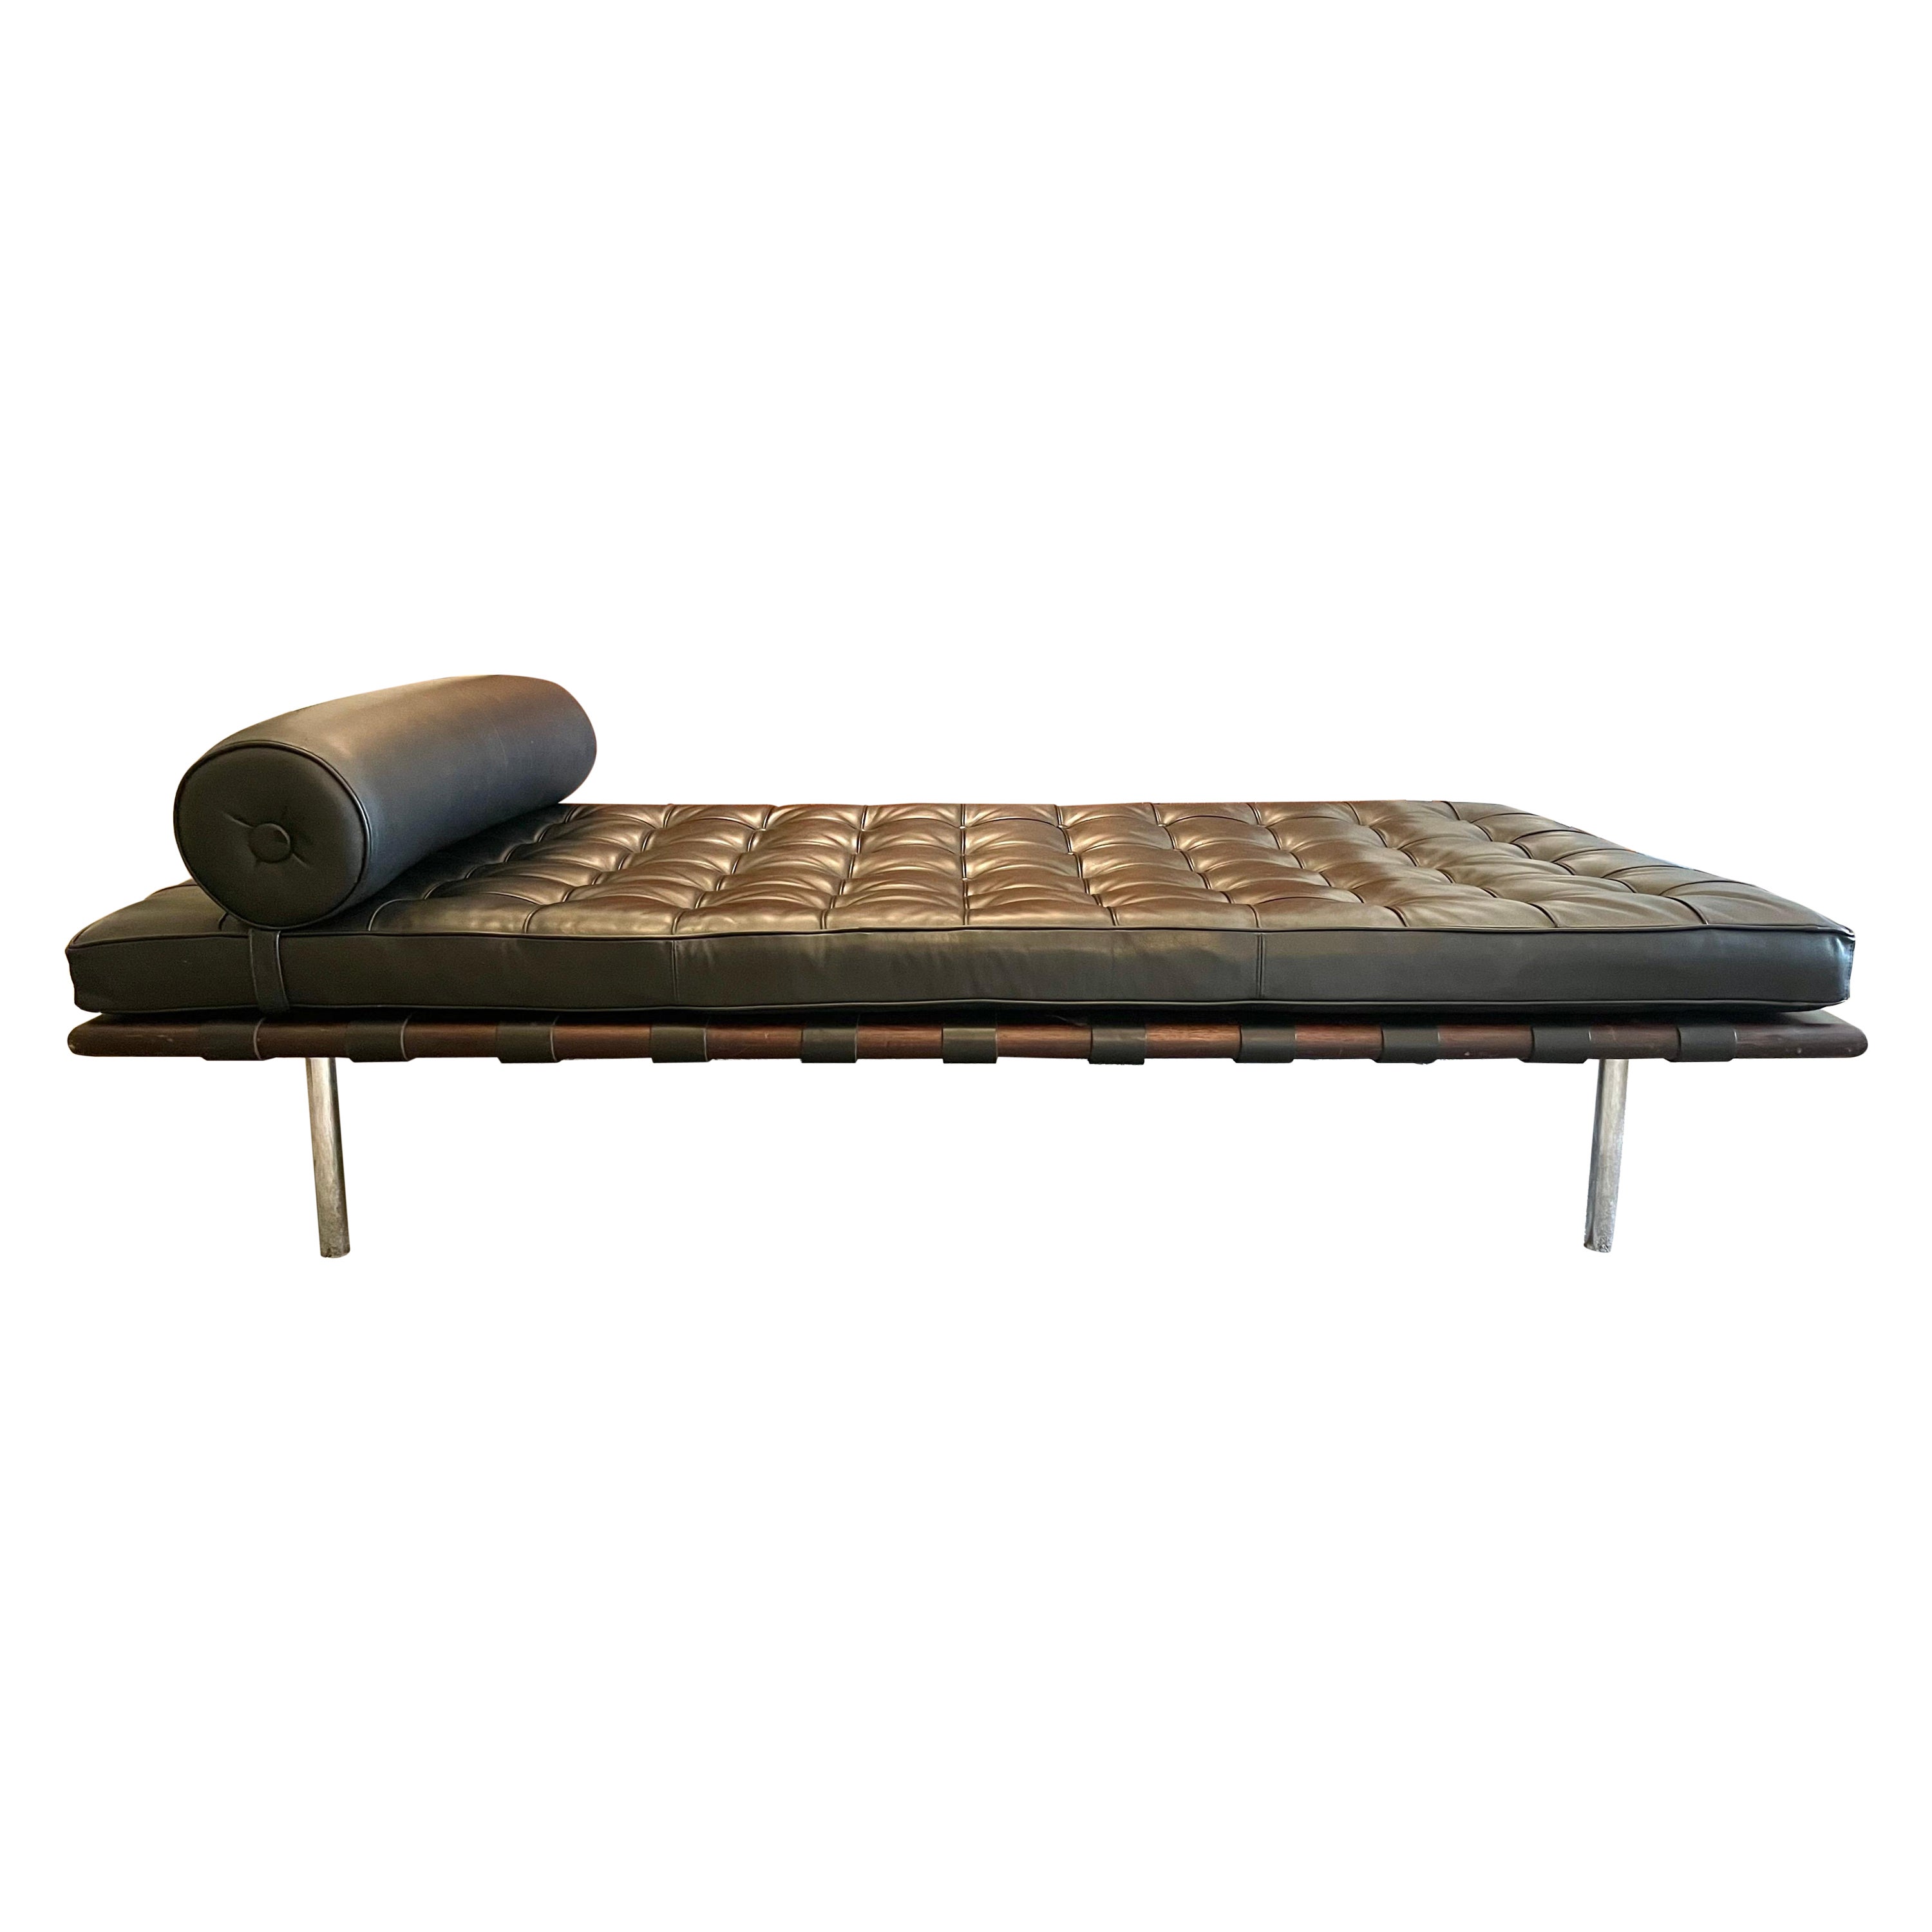 Barcelona Daybed by Ludwig Mies Van der Rohe for Knoll in Black Leather